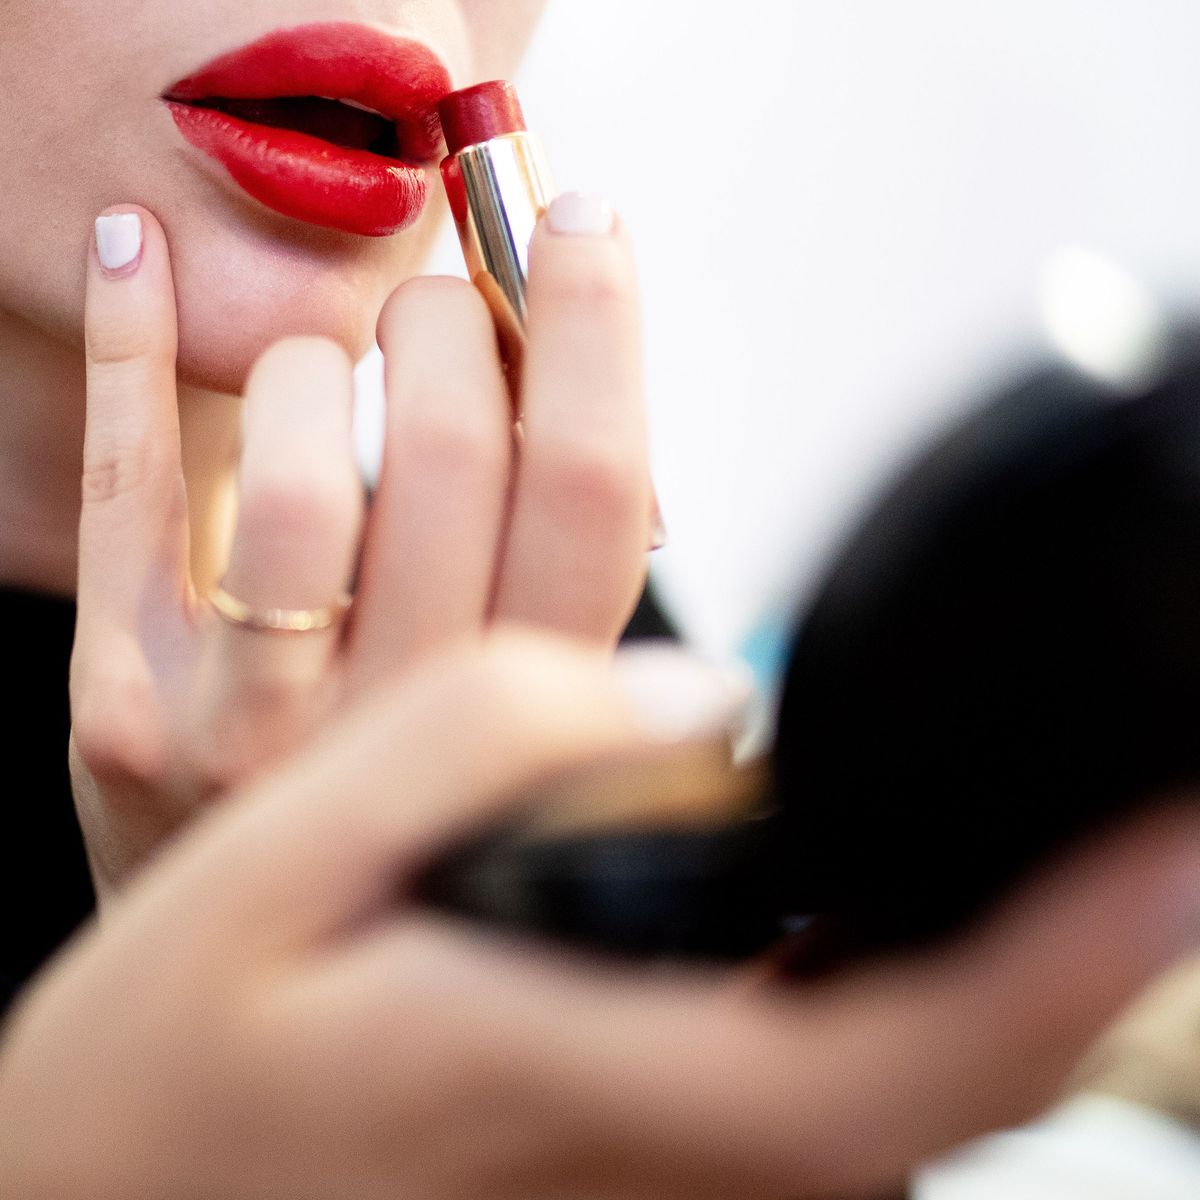 The Signs Your Makeup Has Expired